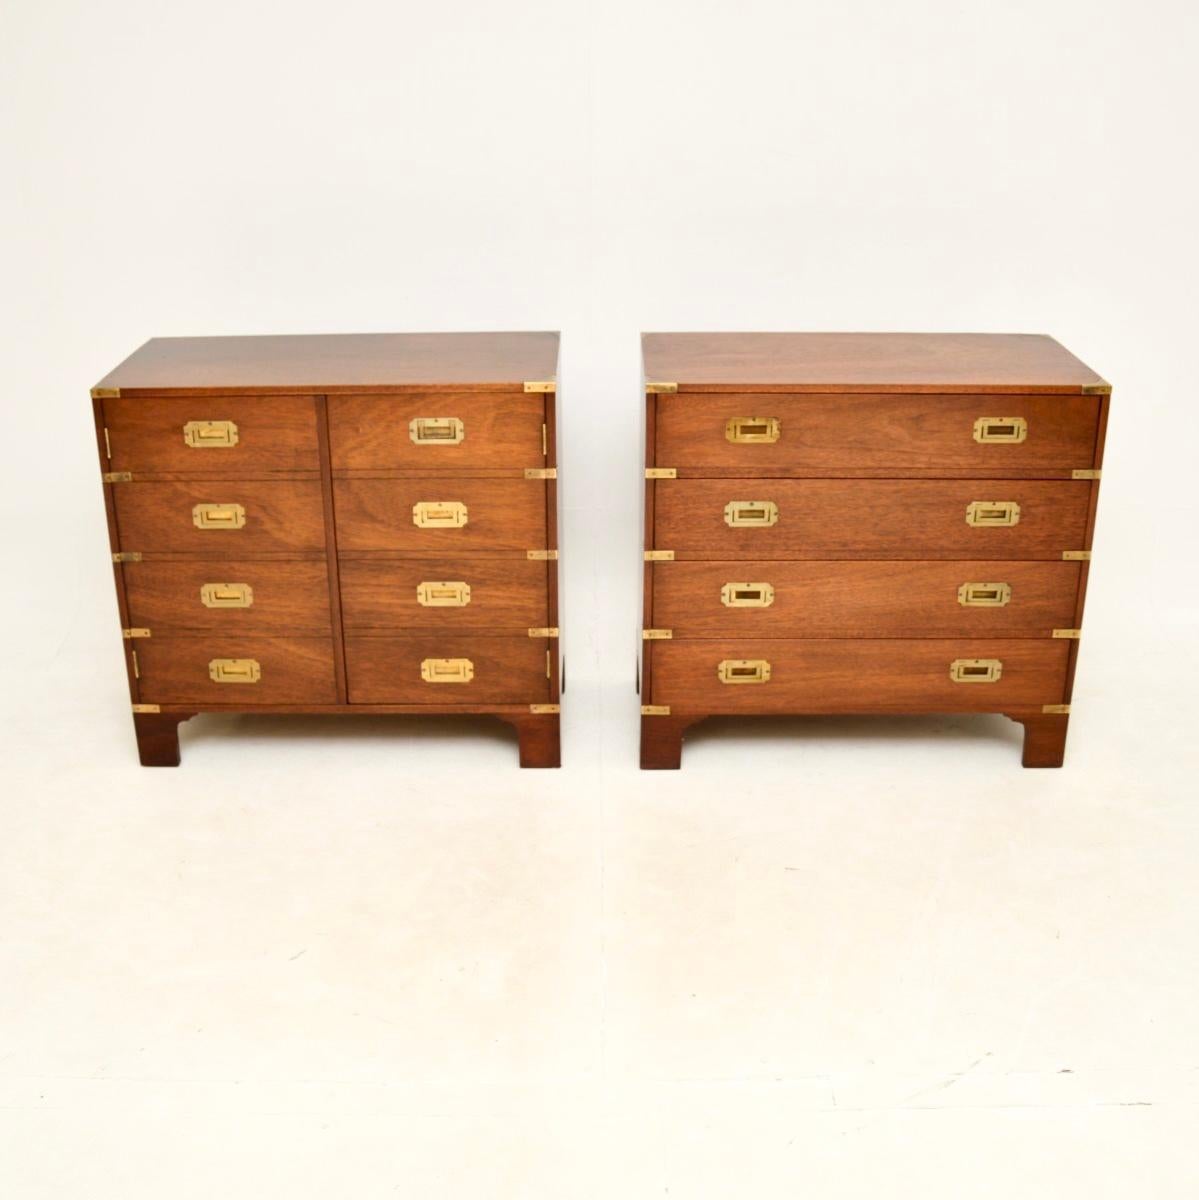 A smart and very well made pair of antique military campaign style chests. They were made in England, they date from around the 1950’s.

The quality is outstanding, one of these is a chest of drawers and one is a two door cabinet, with the front